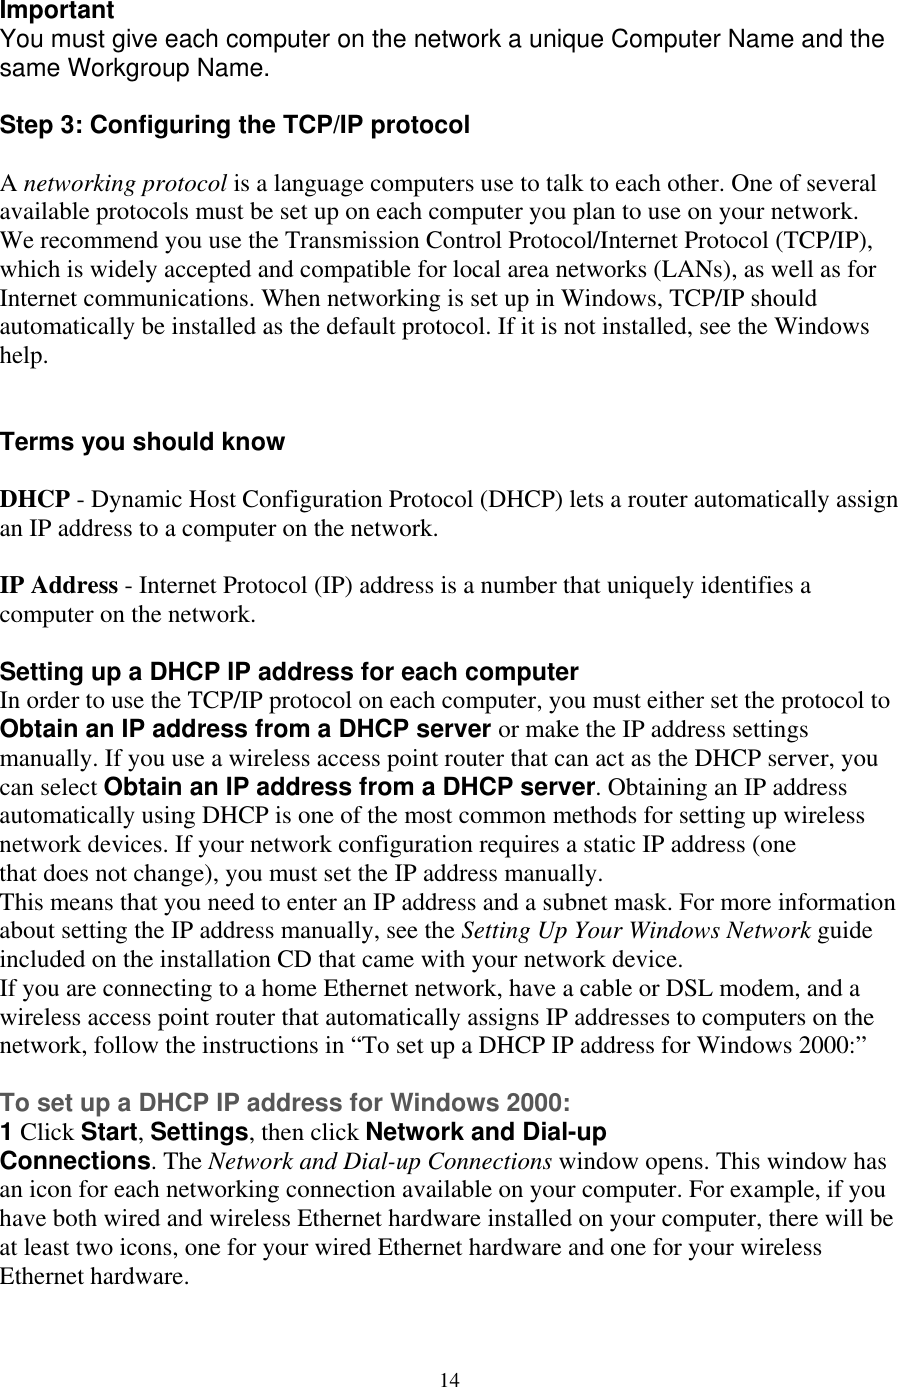  Important    networking protocol is a language computers use to talk to each other. One of several twork. e recommend you use the Transmission Control Protocol/Internet Protocol (TCP/IP), r local area networks (LANs), as well as for ternet communications. When networking is set up in Windows, TCP/IP should , see the Windows help. HCP - Dynamic Host Configuration Protocol (DHCP) lets a router automatically assign   must either set the protocol to btain an IP address from a DHCP server or make the IP address settings  r, you from a DHCP server. Obtaining an IP address utomatically using DHCP is one of the most common methods for setting up wireless ces. If your network configuration requires a static IP address (one enter an IP address and a subnet mask. For more information bout setting the IP address manually, see the Setting Up Your Windows Network guide our network device.  you are connecting to a home Ethernet network, have a cable or DSL modem, and a  n for each networking connection available on your computer. For example, if you ave both wired and wireless Ethernet hardware installed on your computer, there will be t least two icons, one for your wired Ethernet hardware and one for your wireless You must give each computer on the network a unique Computer Name and thesame Workgroup Name.  Step 3: Configuring the TCP/IP protocol  Aavailable protocols must be set up on each computer you plan to use on your neWwhich is widely accepted and compatible foInautomatically be installed as the default protocol. If it is not installed  Terms you should know  Dan IP address to a computer on the network.  IP Address - Internet Protocol (IP) address is a number that uniquely identifies acomputer on the network.  Setting up a DHCP IP address for each computer In order to use the TCP/IP protocol on each computer, youOmanually. If you use a wireless access point router that can act as the DHCP servecan select Obtain an IP address anetwork devithat does not change), you must set the IP address manually. This means that you need to aincluded on the installation CD that came with yIfwireless access point router that automatically assigns IP addresses to computers on the network, follow the instructions in “To set up a DHCP IP address for Windows 2000:”  To set up a DHCP IP address for Windows 2000: 1 Click Start, Settings, then click Network and Dial-up Connections. The Network and Dial-up Connections window opens. This window hasan icohaEthernet hardware.  14